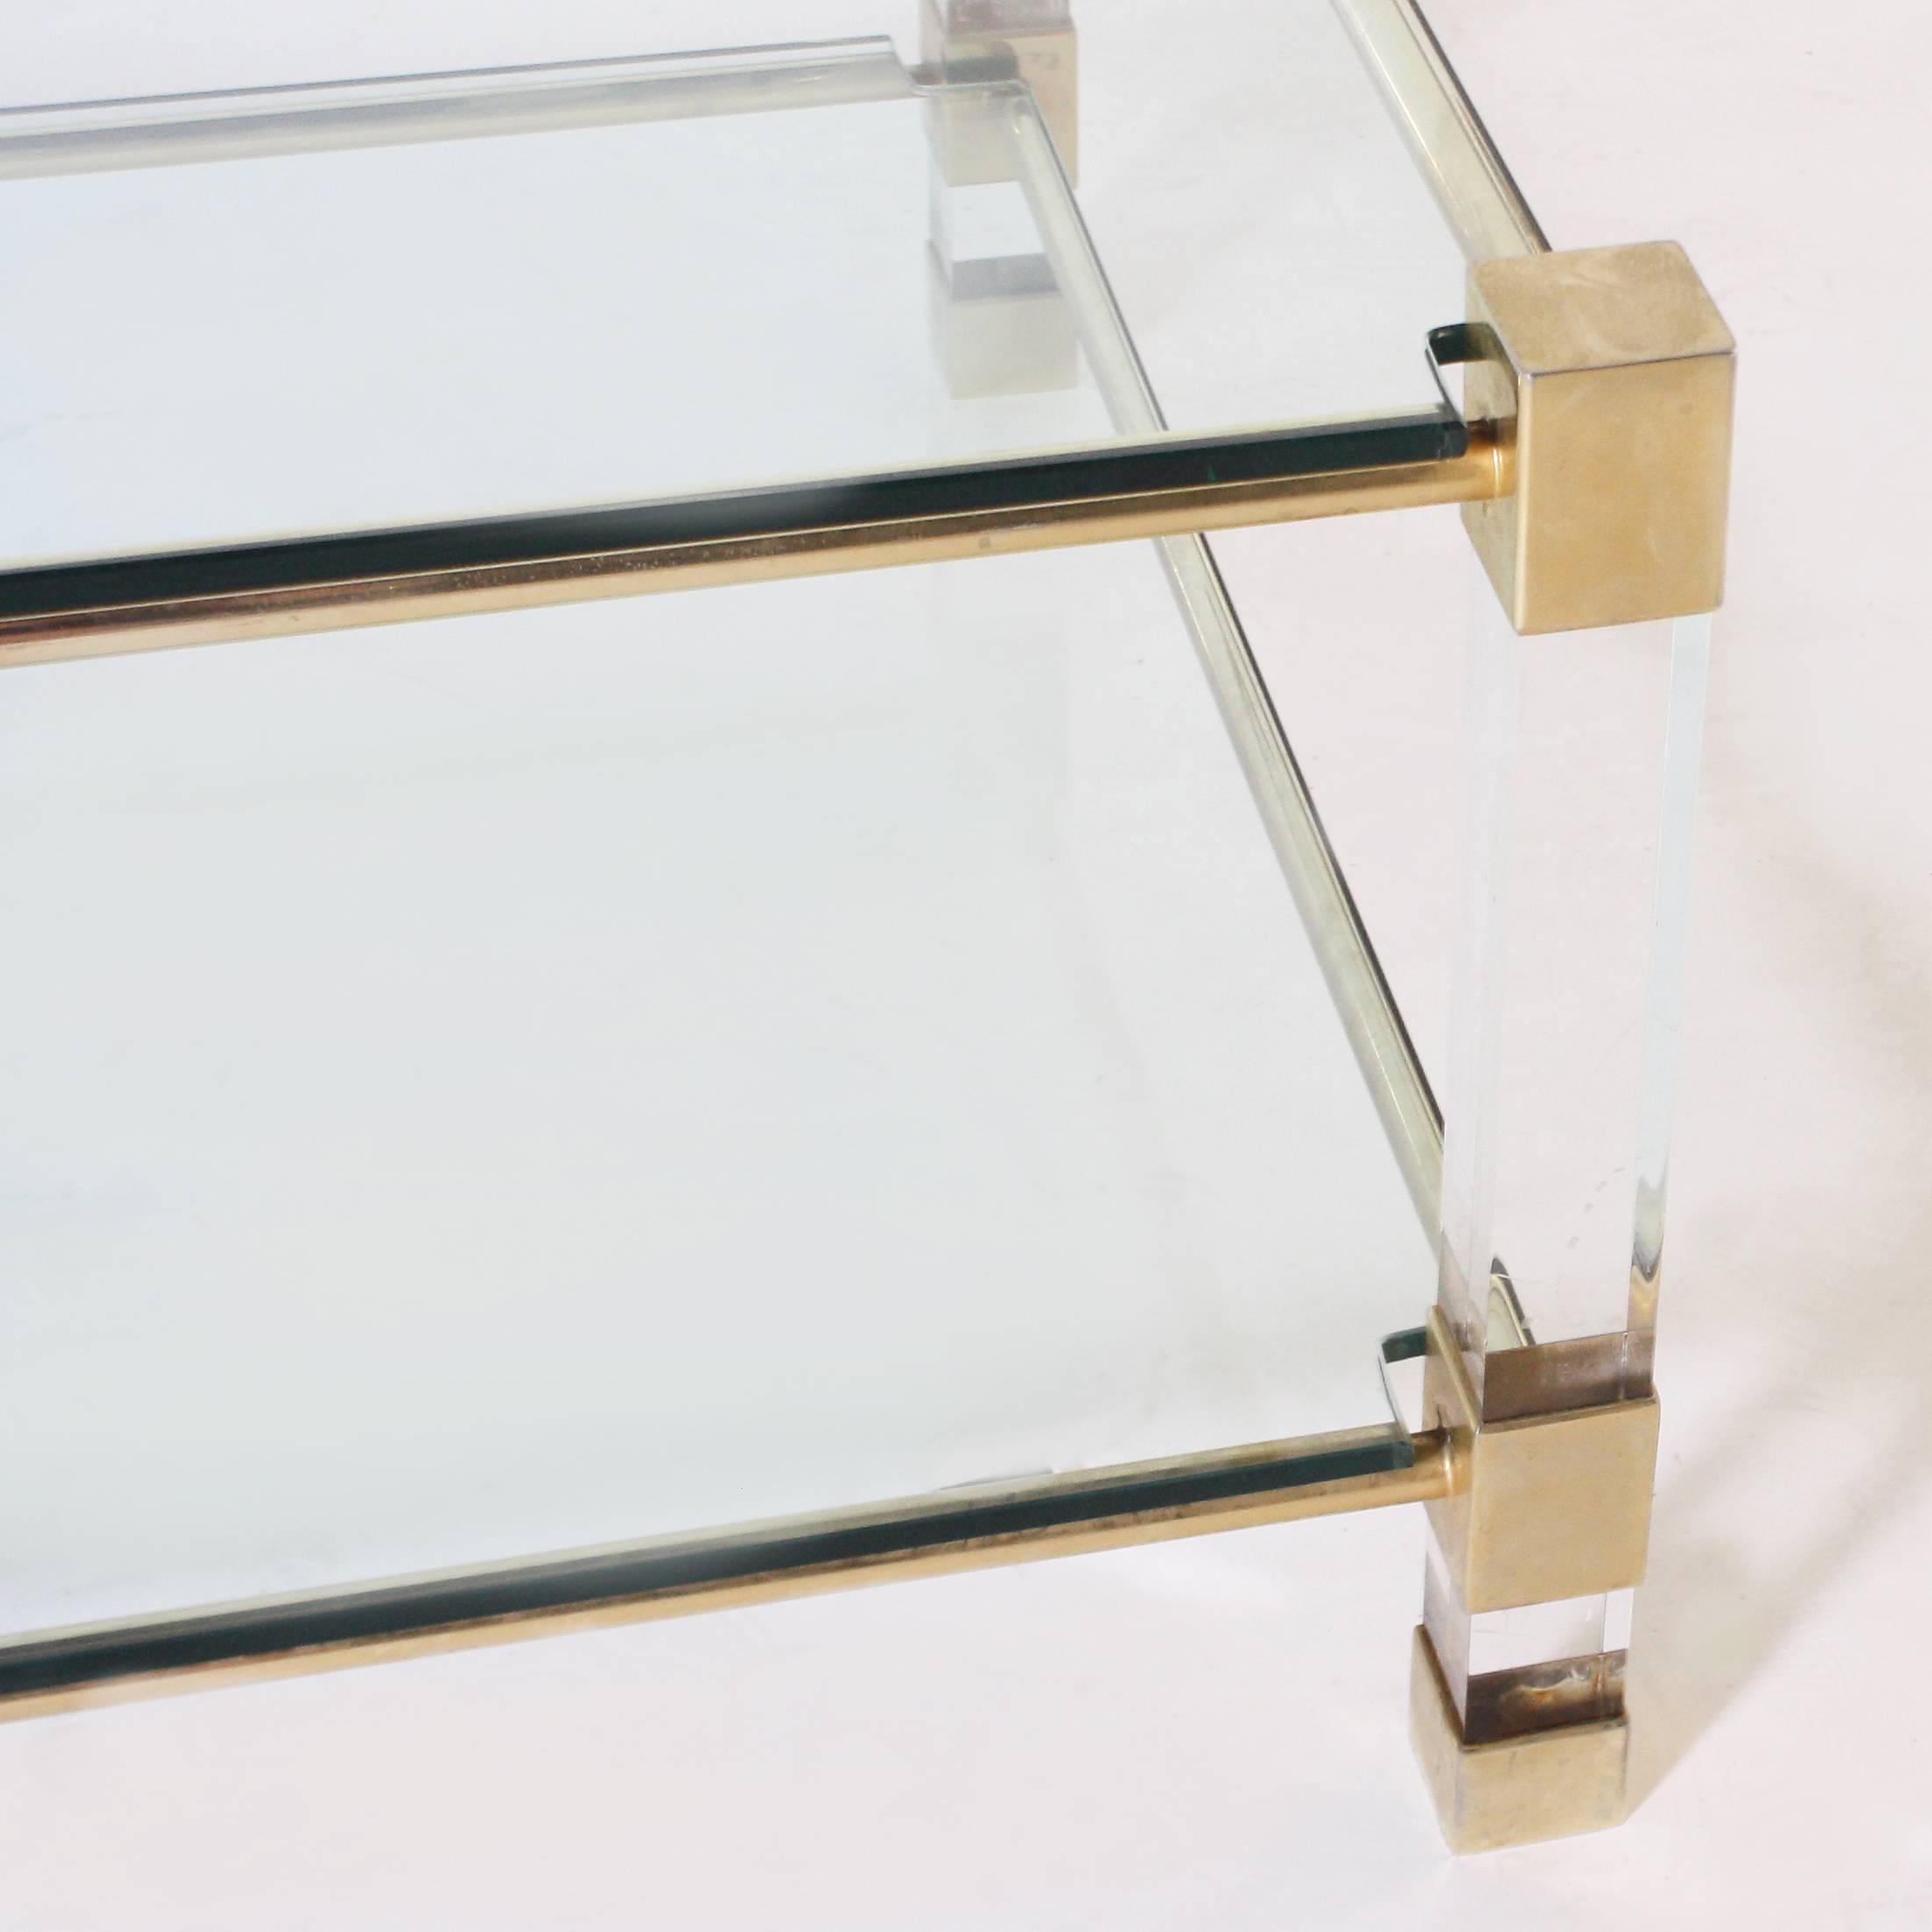 Brass coffee table with square Lucite legs and clear glass tops, circa 1940.
  